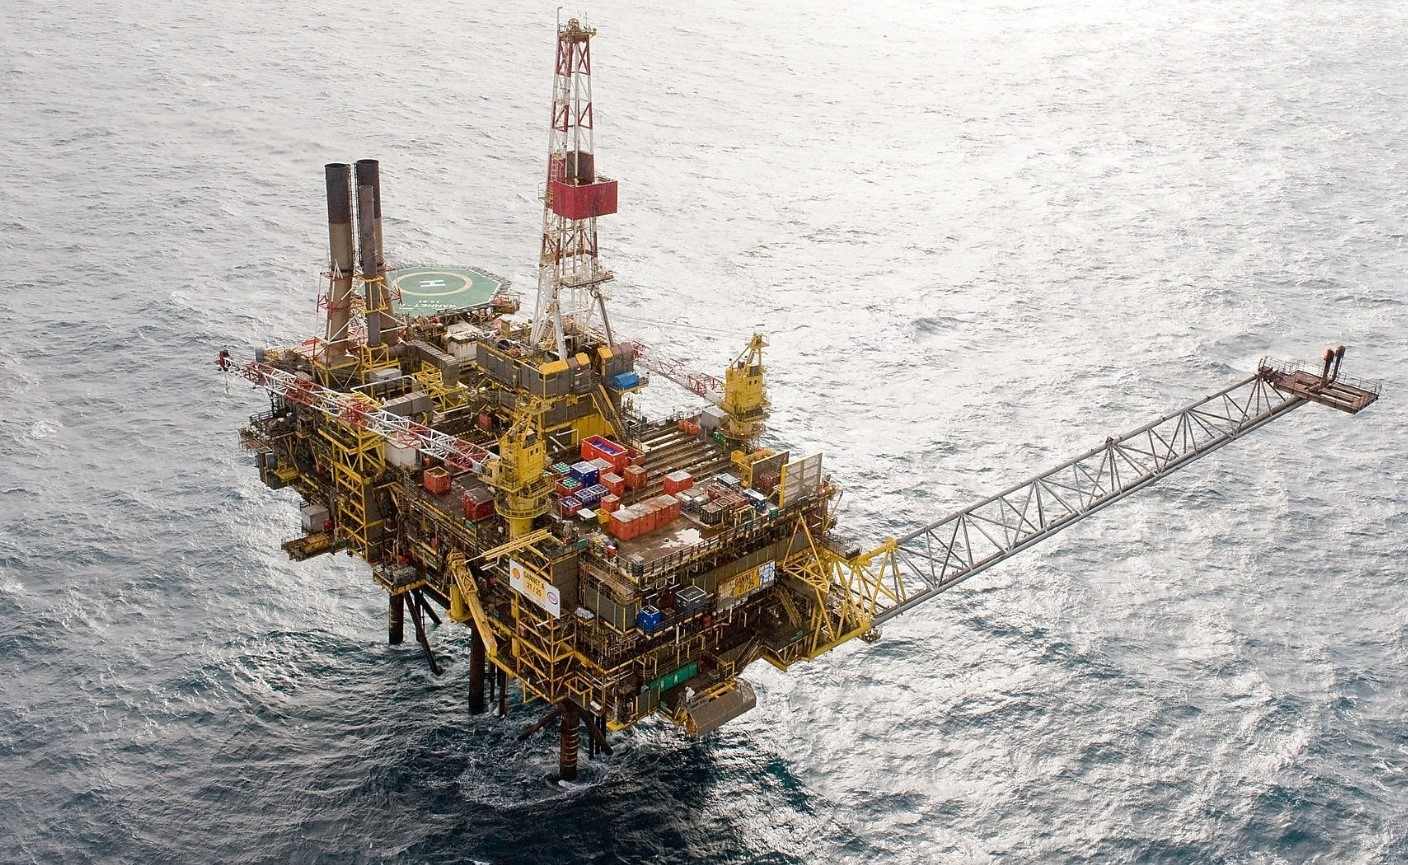 The deal between NEO Energy and Exxon includes Gannet field in the North Sea